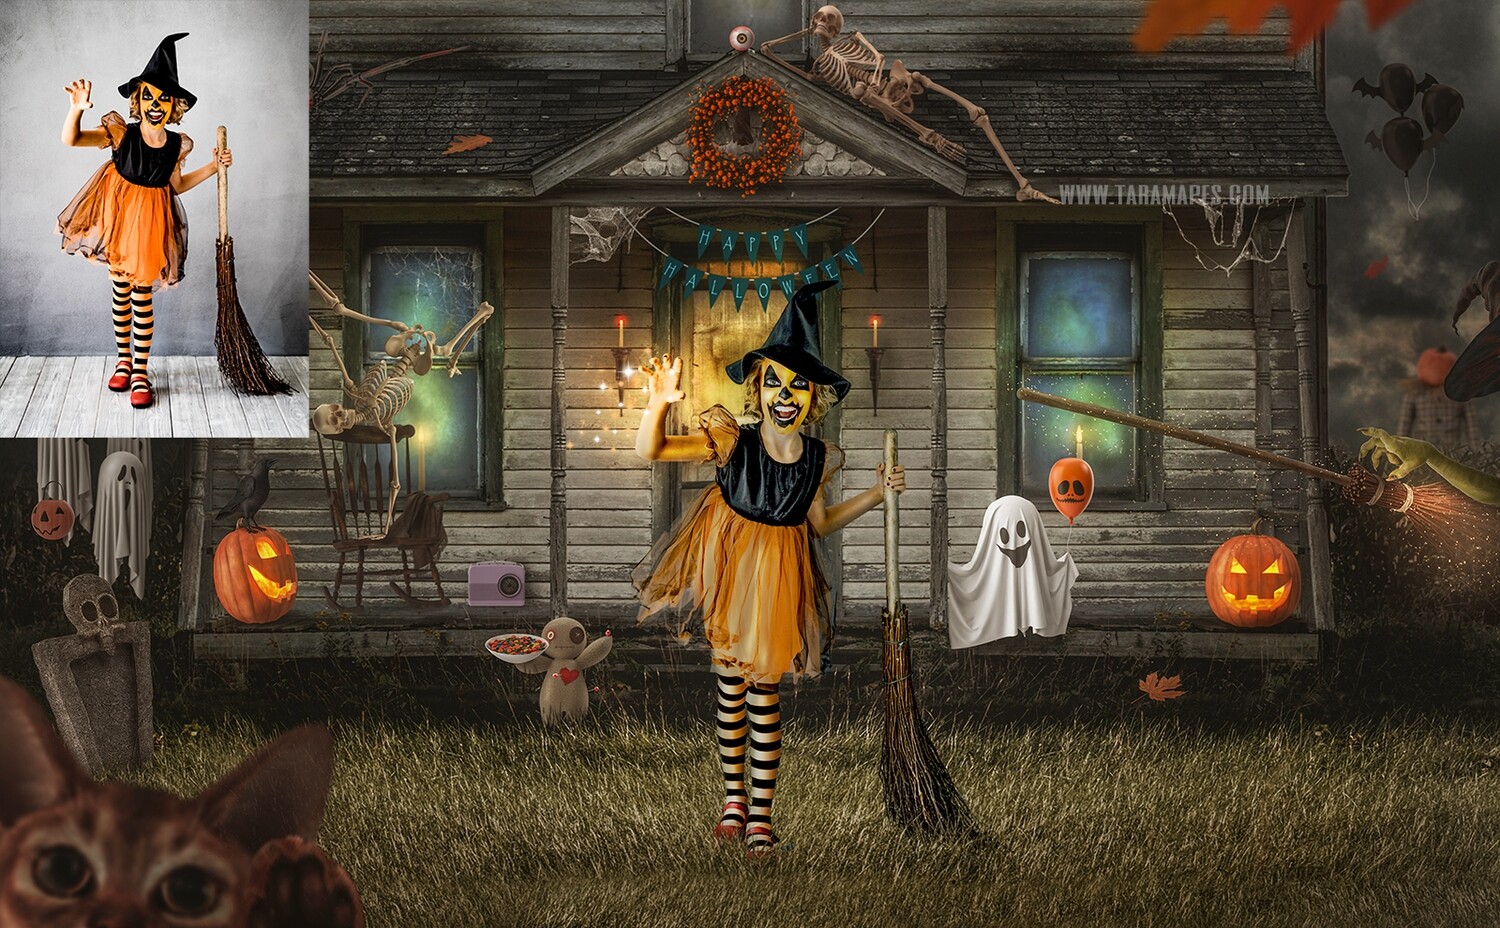 The Haunted House Painterly Fine Art Photoshop Tutorial by Tara Mapes